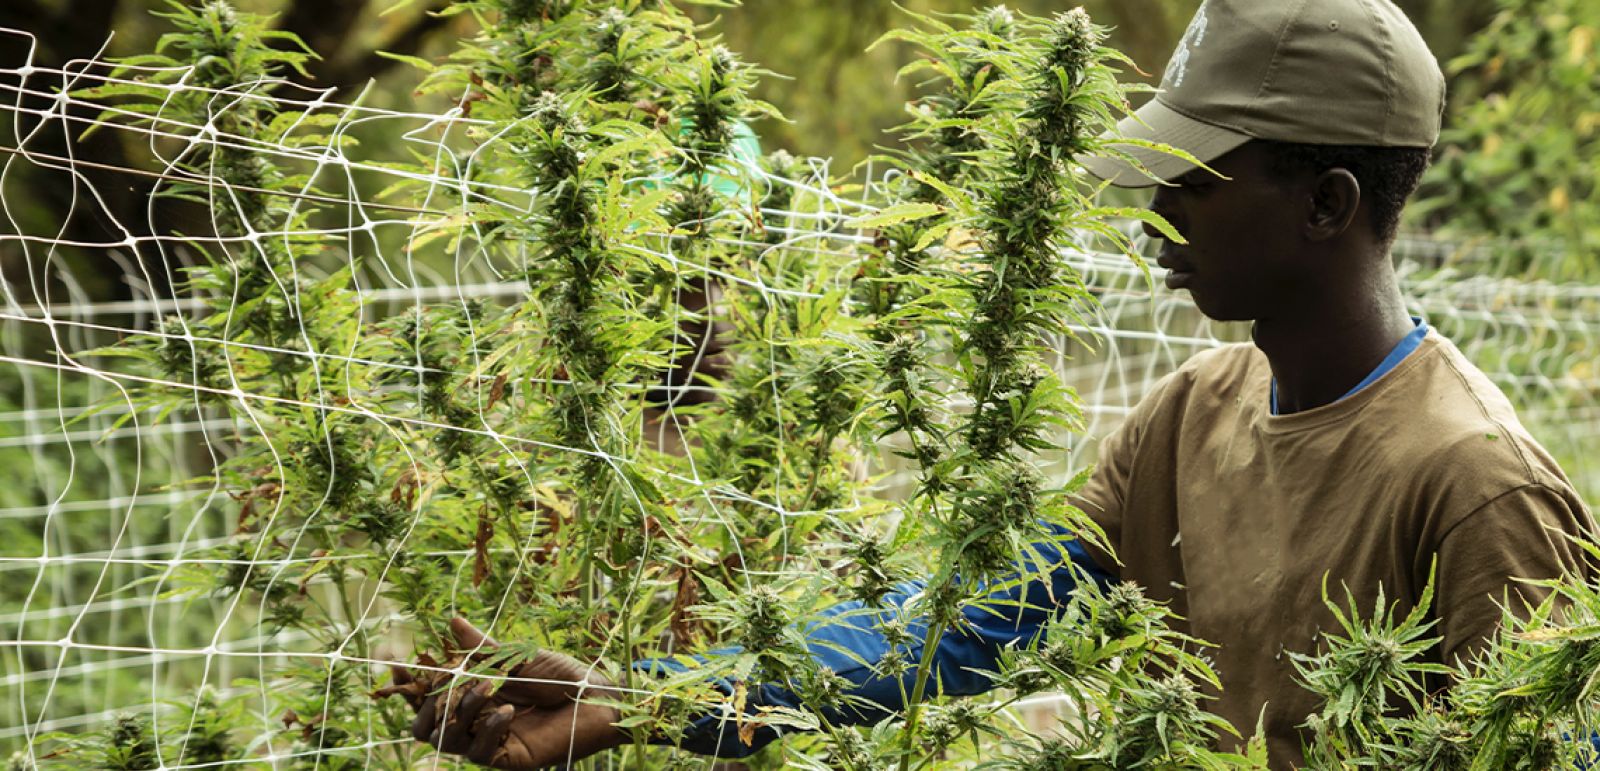 Photo for: Tax Relief For Marijuana Growers Of California Affected By Fires and Blackouts